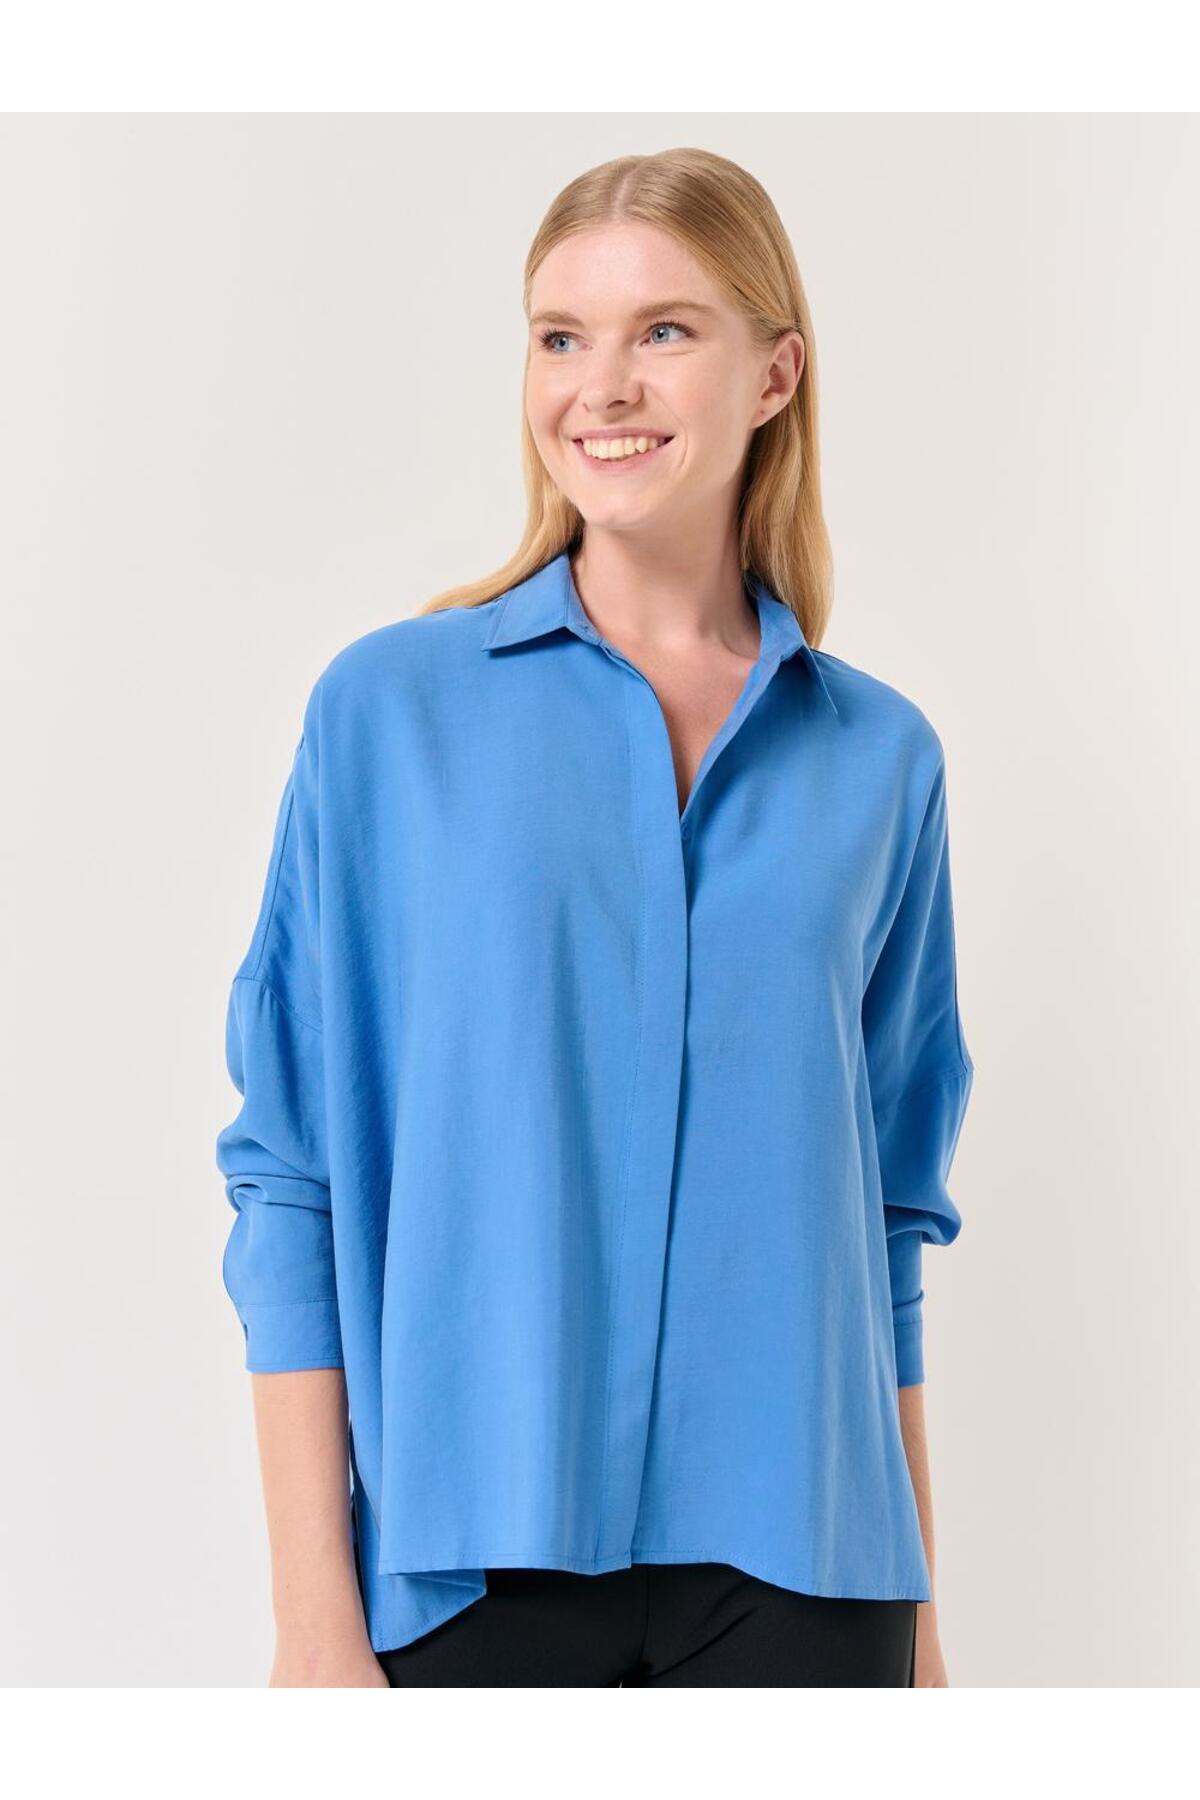 Jimmy Key Cobalt Loose Fit Shirt in a Woven Fabric with Low Back Long Sleeves.